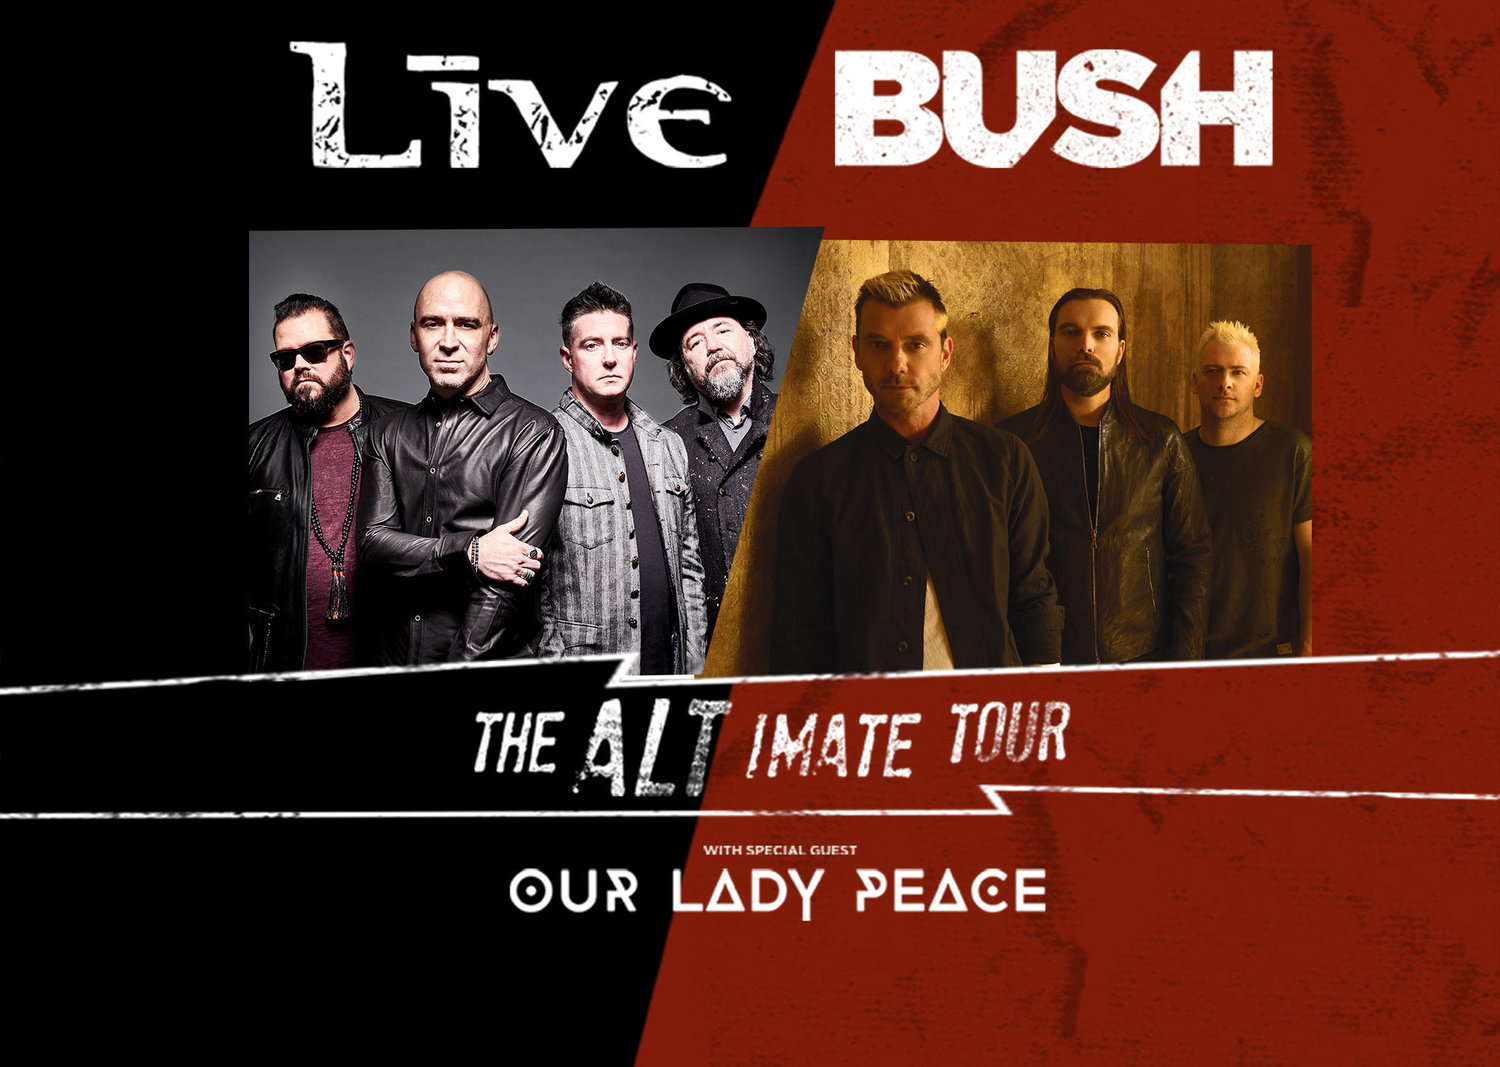 +LIVE+ & Bush The ALTIMATE Tour Hill Country News